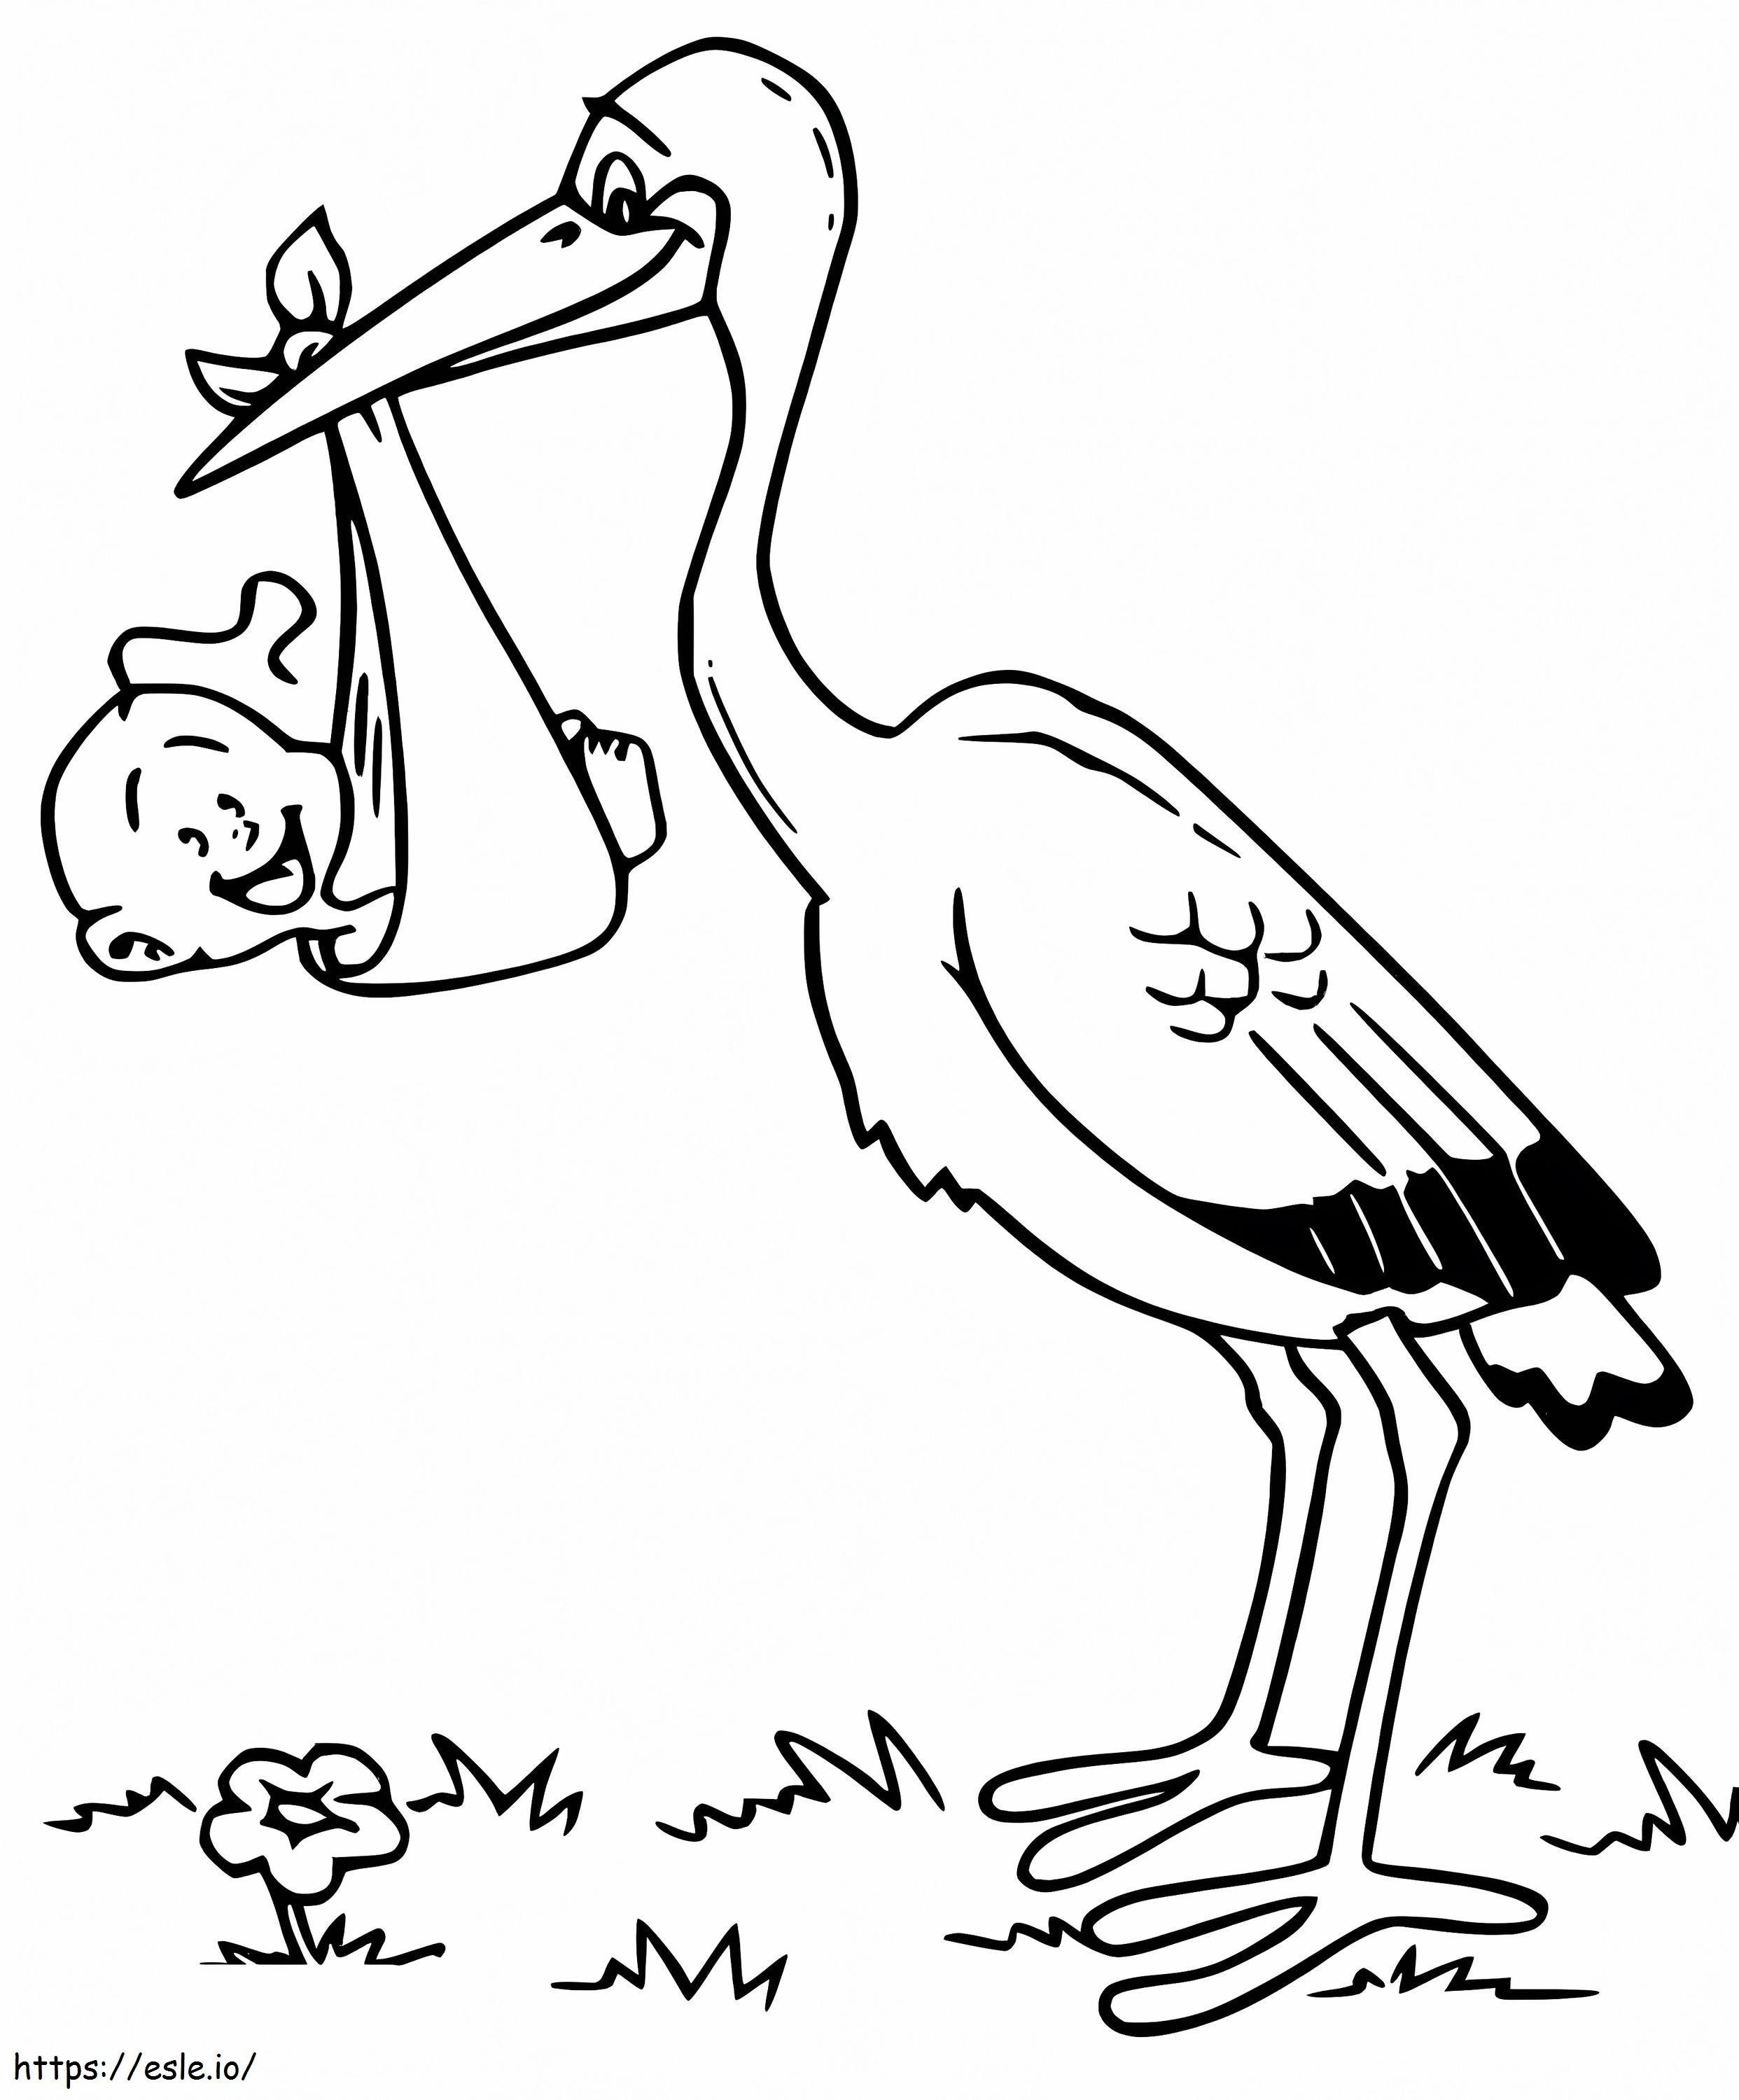 Cute Stork With Baby coloring page